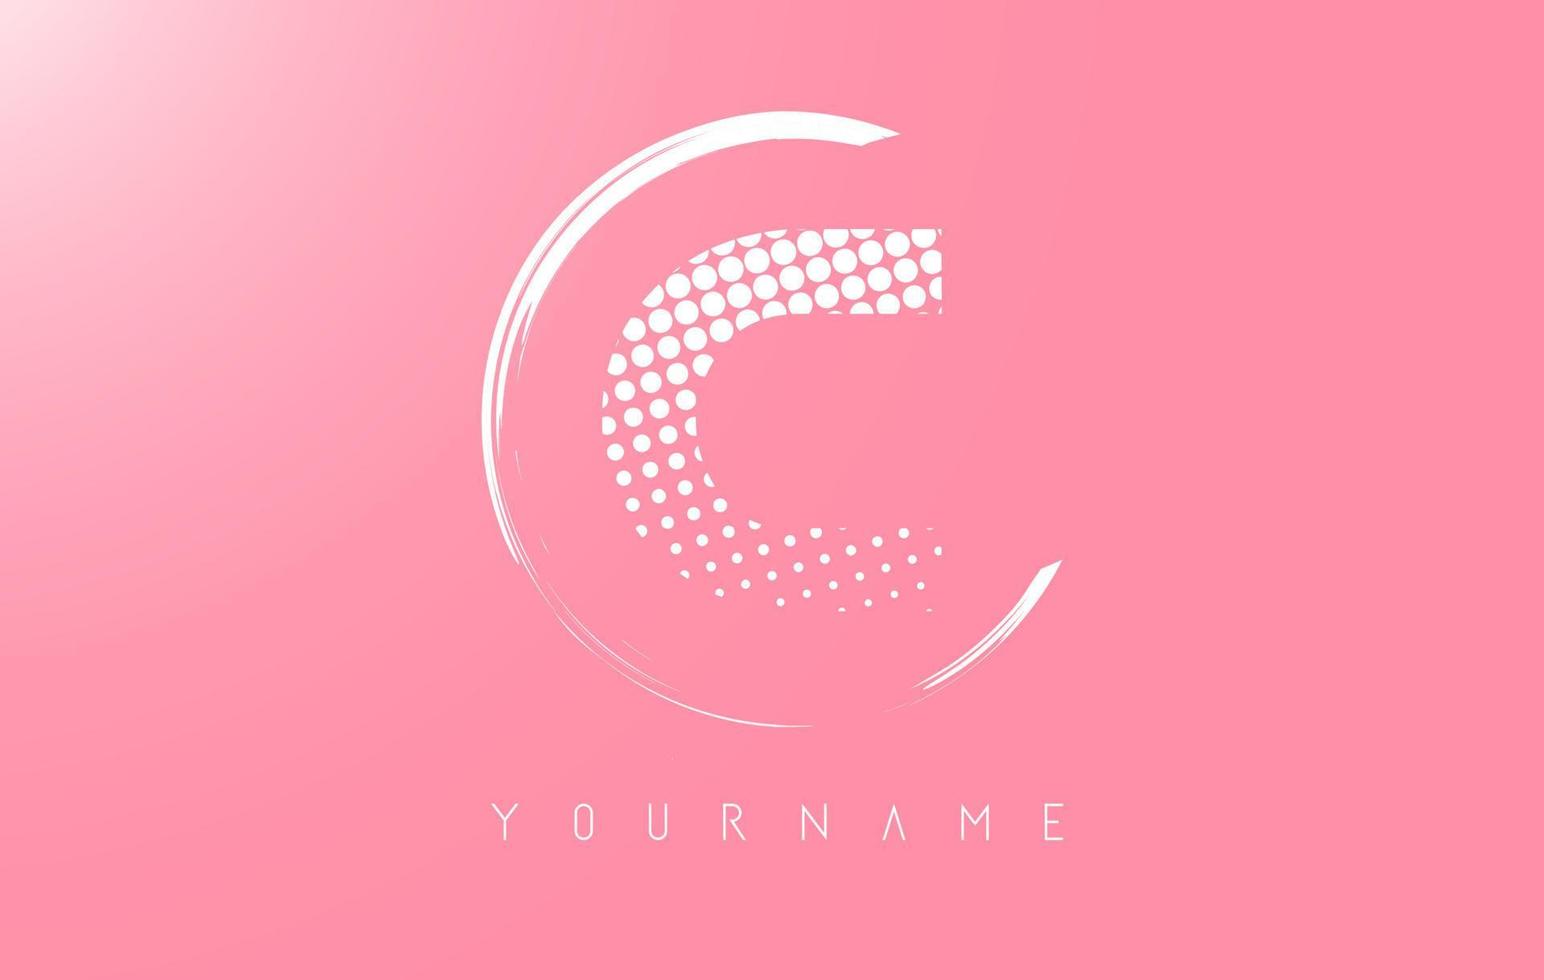 White C letter logo design with white dots and white circle frame on pink background. vector